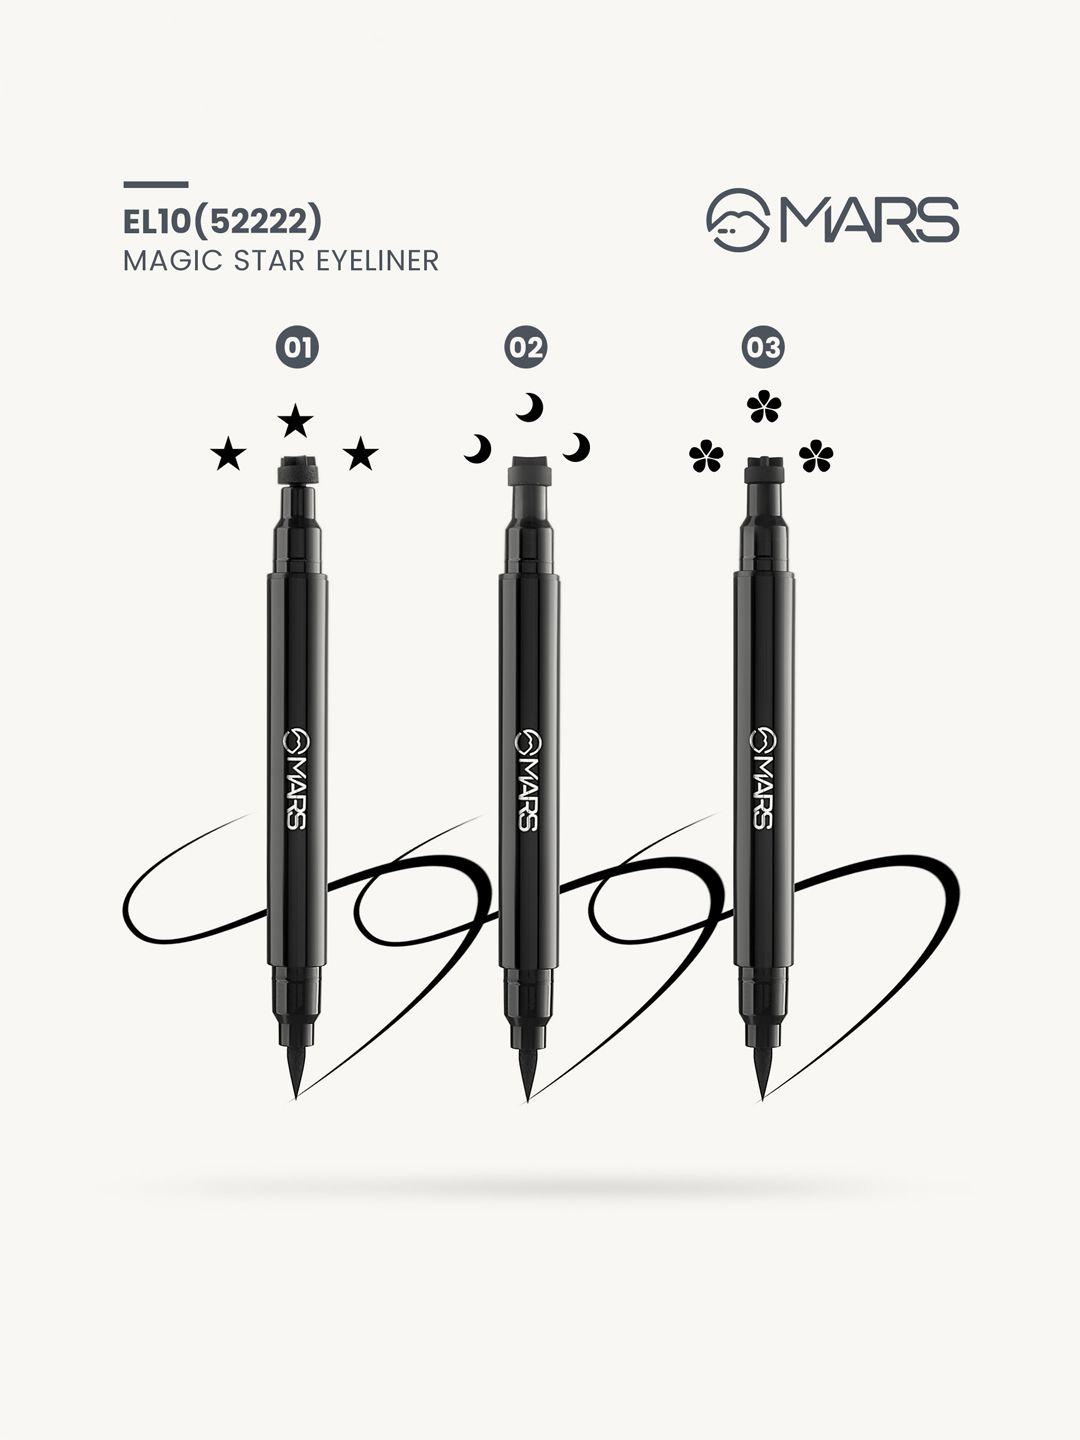 mars set of 3 magic star eyeliners with tattoo stamp 7.5ml each - 01+02+03